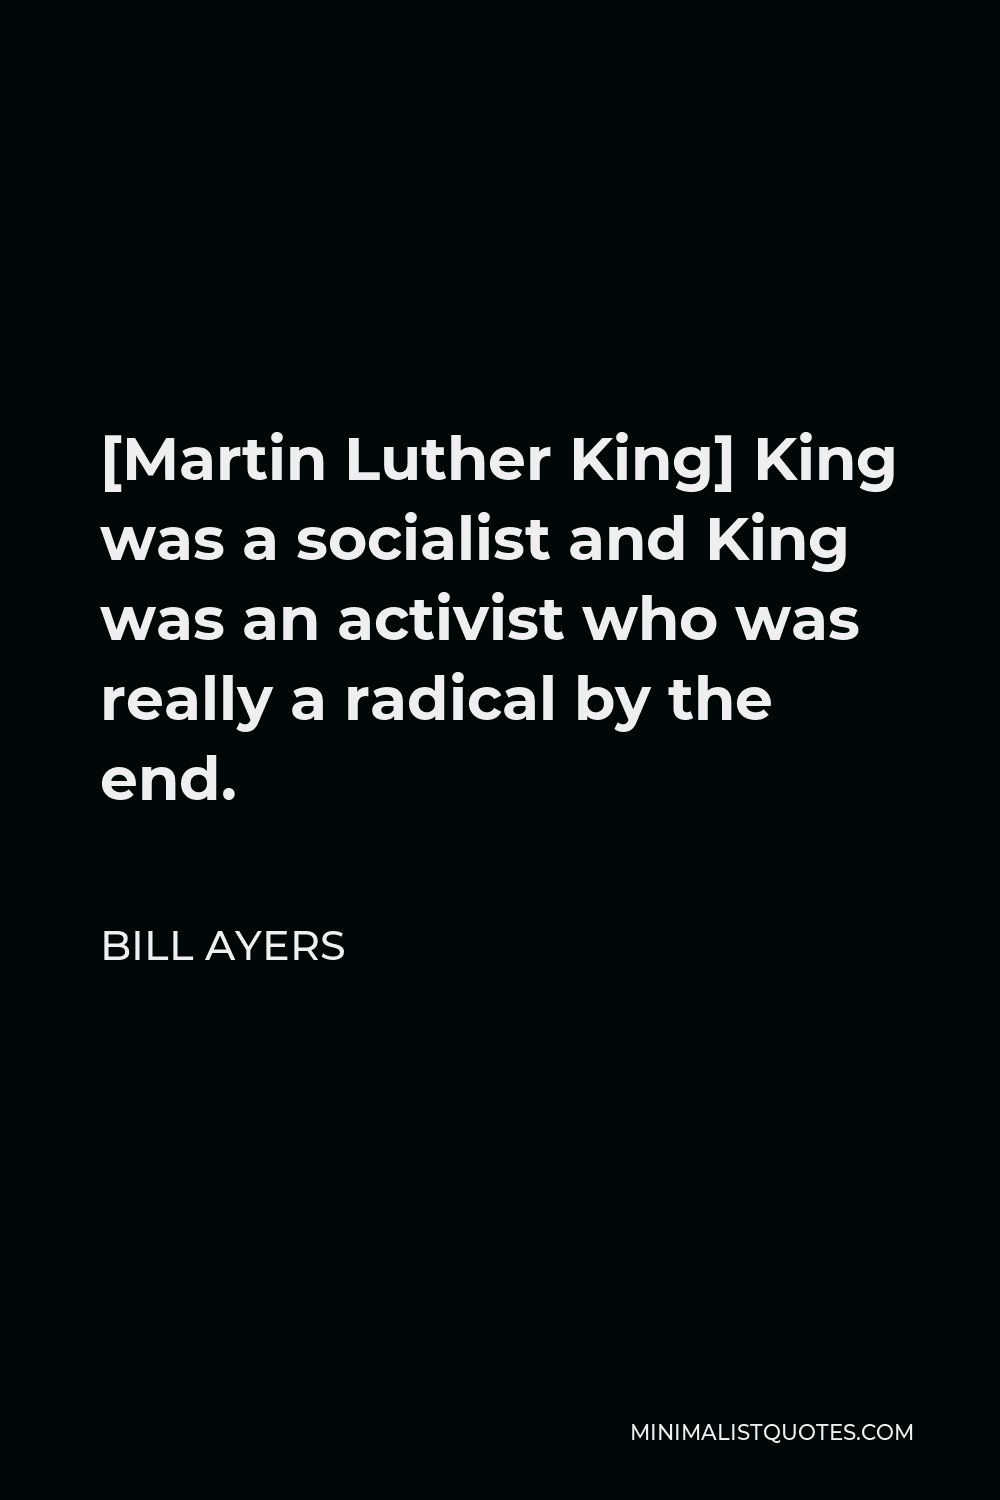 Bill Ayers Quote - [Martin Luther King] King was a socialist and King was an activist who was really a radical by the end.